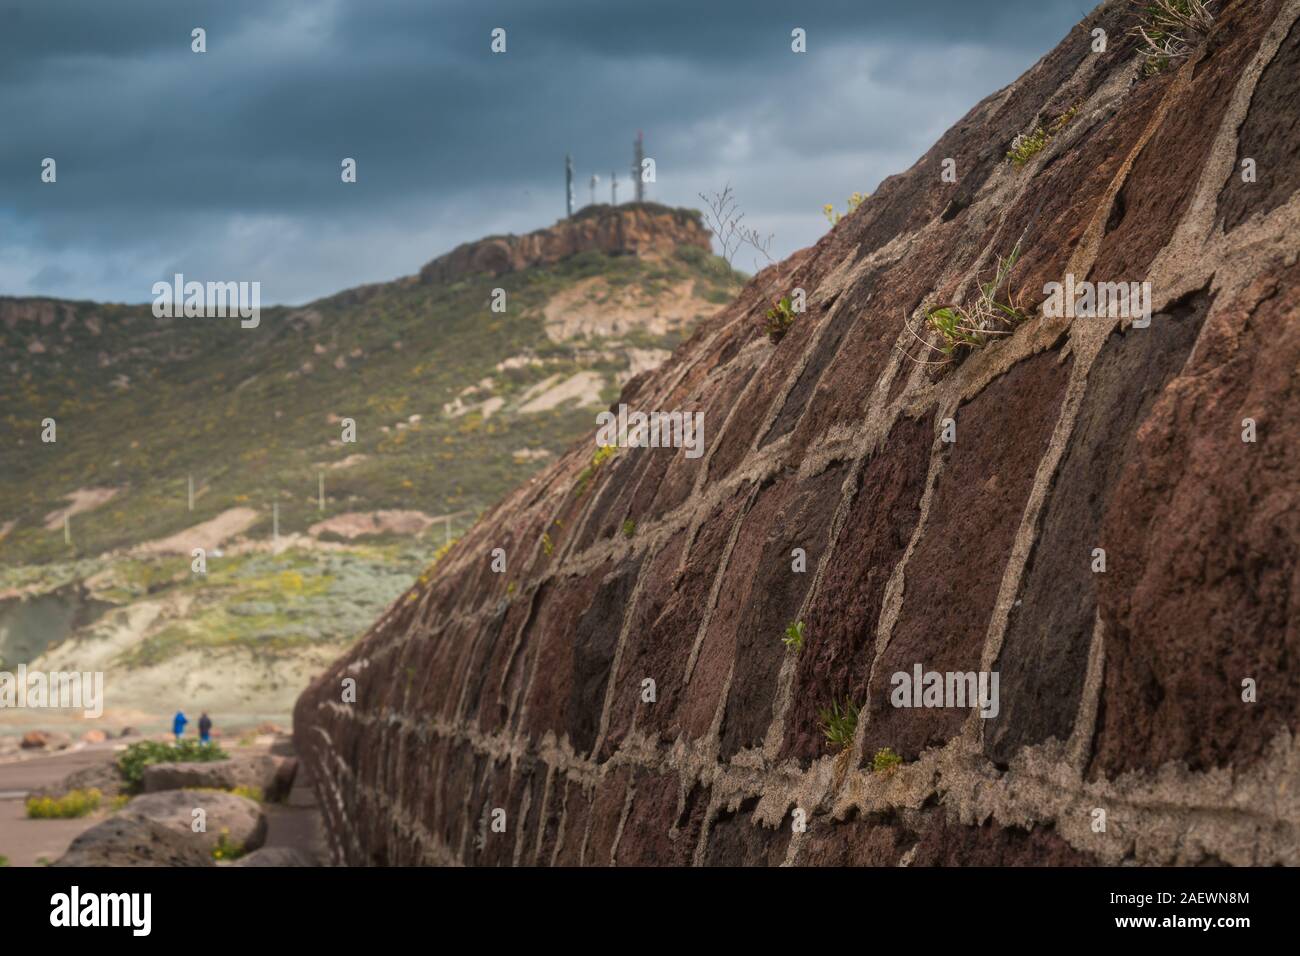 Detail of a high wall made of stones, between the sea and an old tower. Mountain in the background. Intense stormy clouds. Bosa Marina, Sardinia, Ital Stock Photo